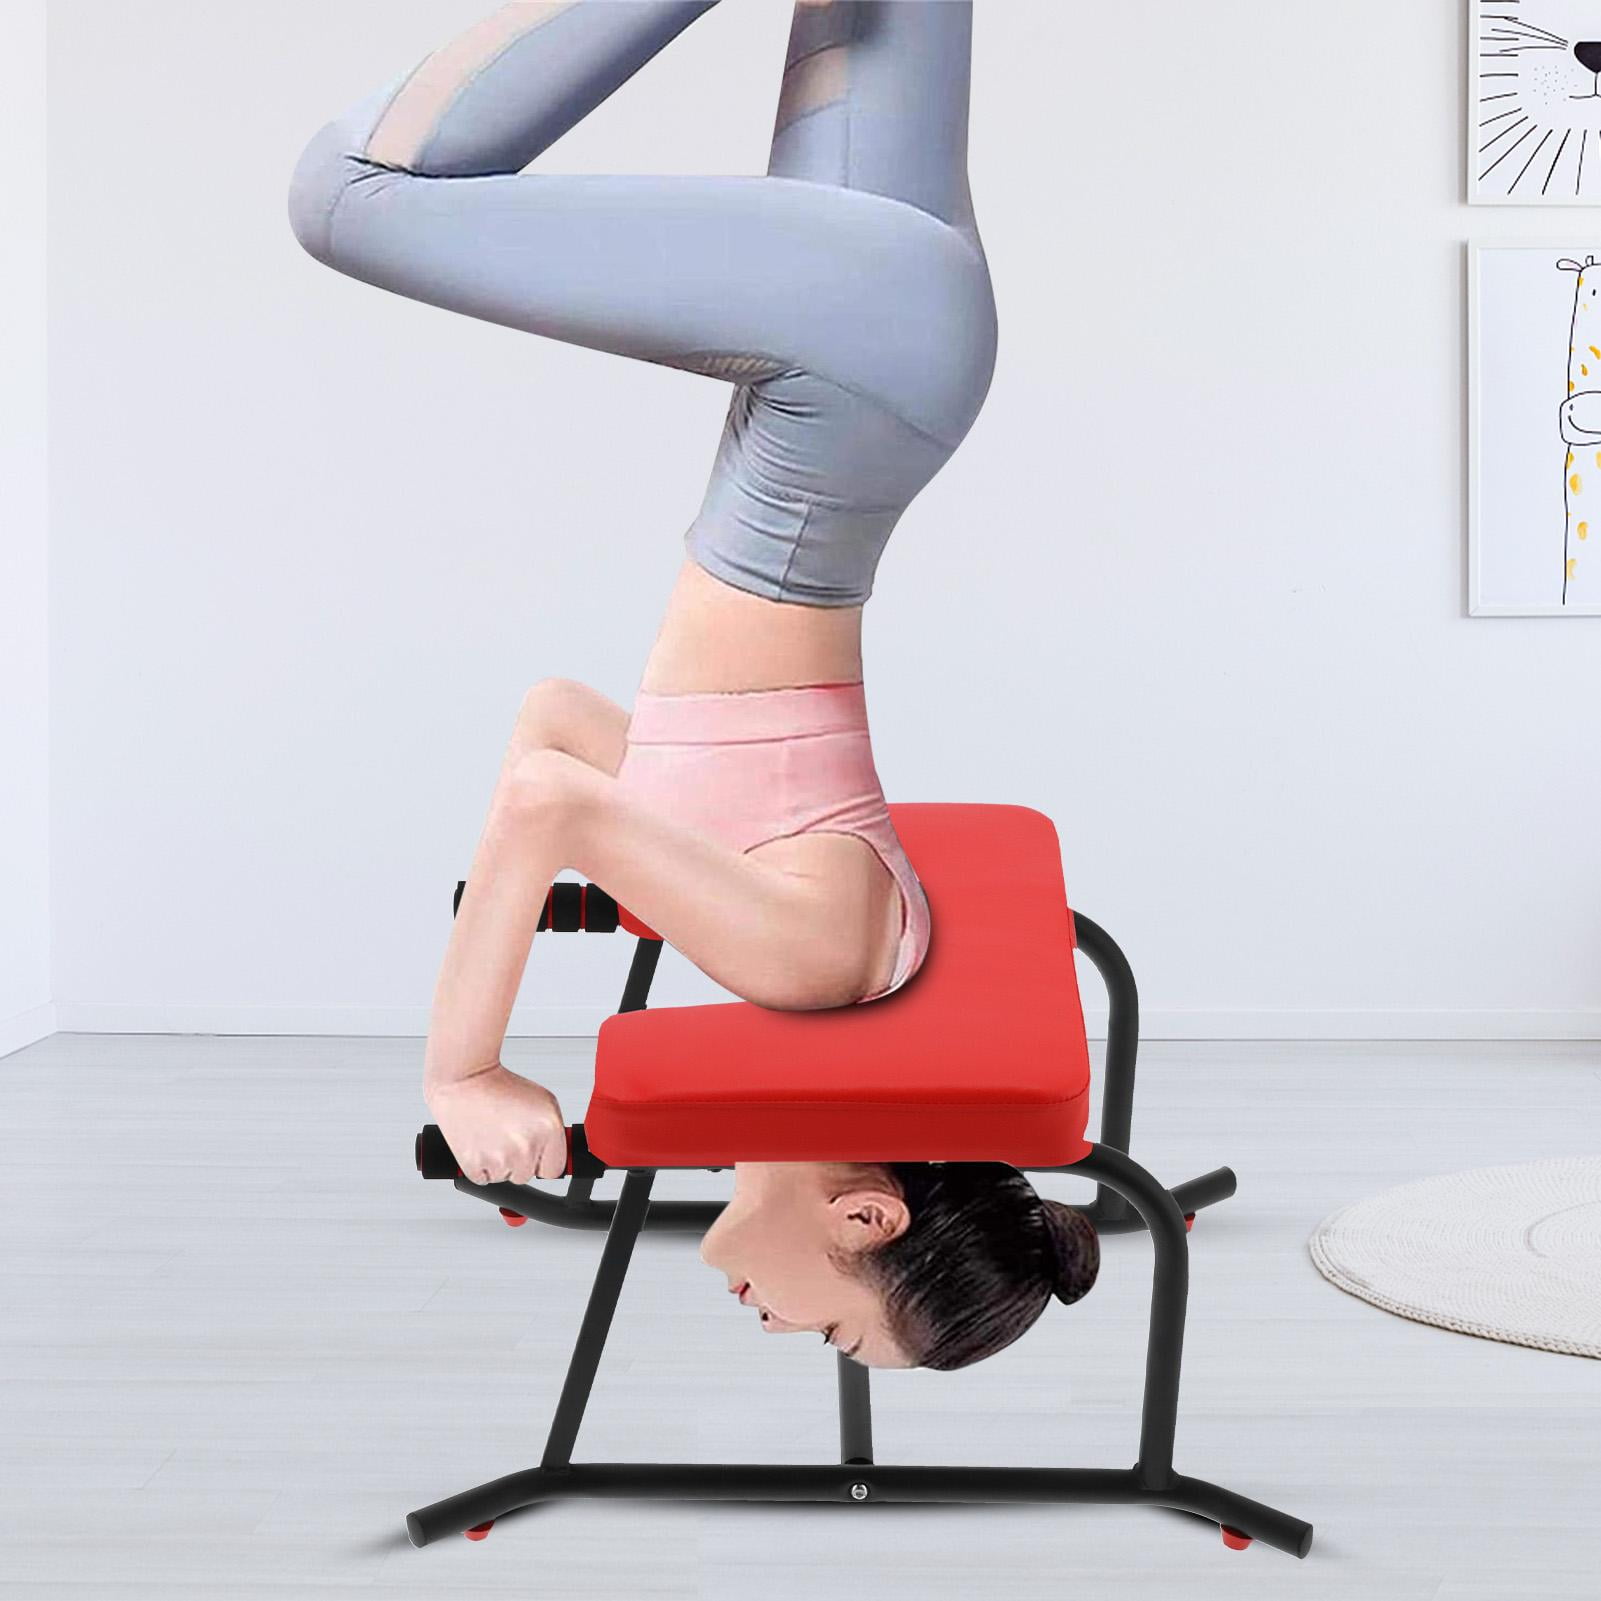 Details about   Yoga Headstand Chair Fitness Headstander Stool Inversion Bench Workout Exercise 